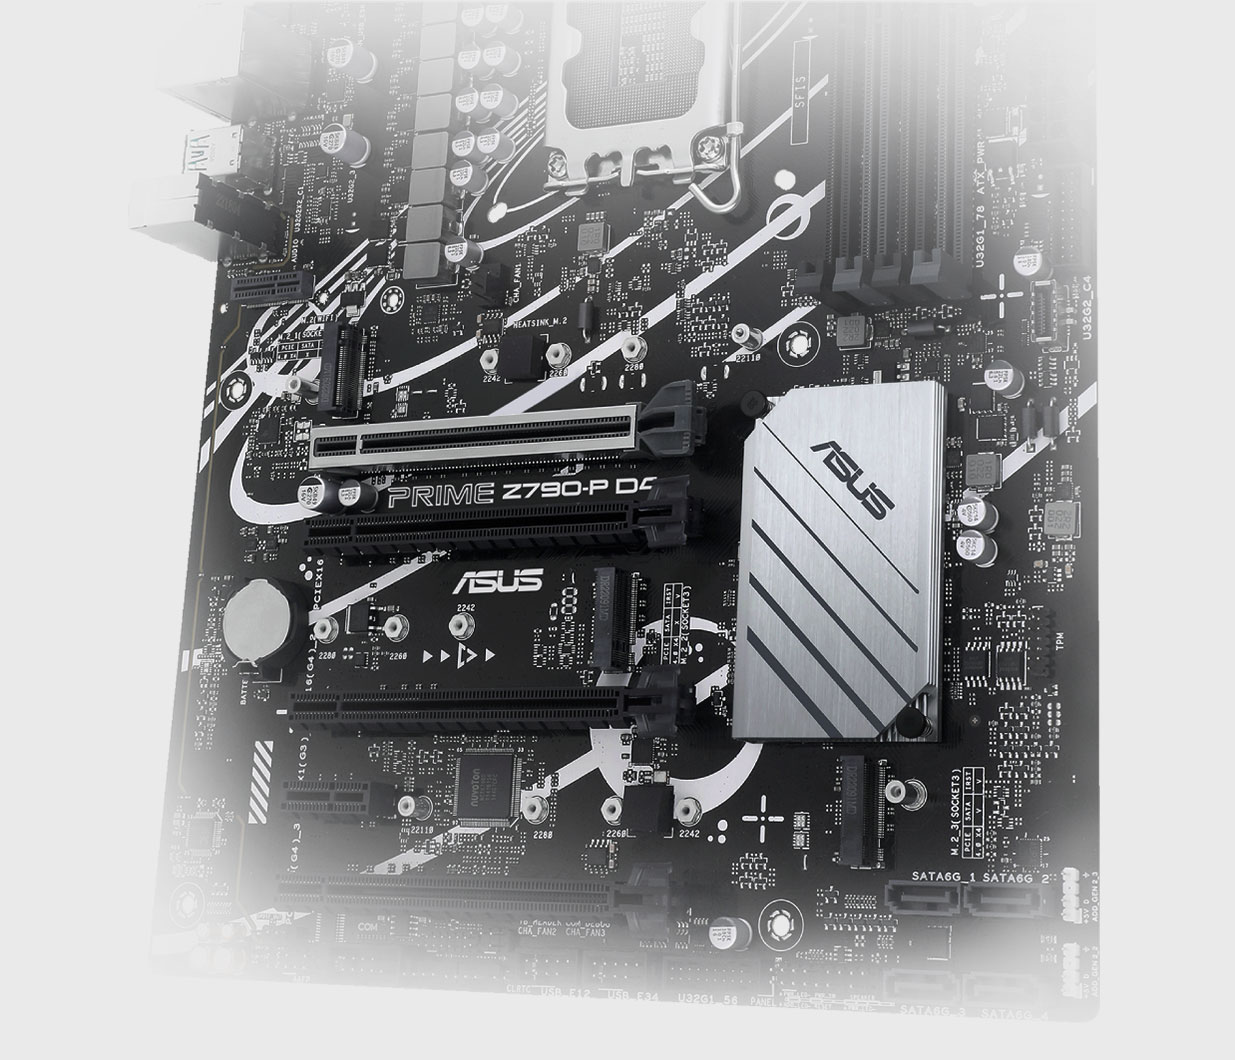 The PRIME Z790-P D4 motherboard supports three M.2 slots.